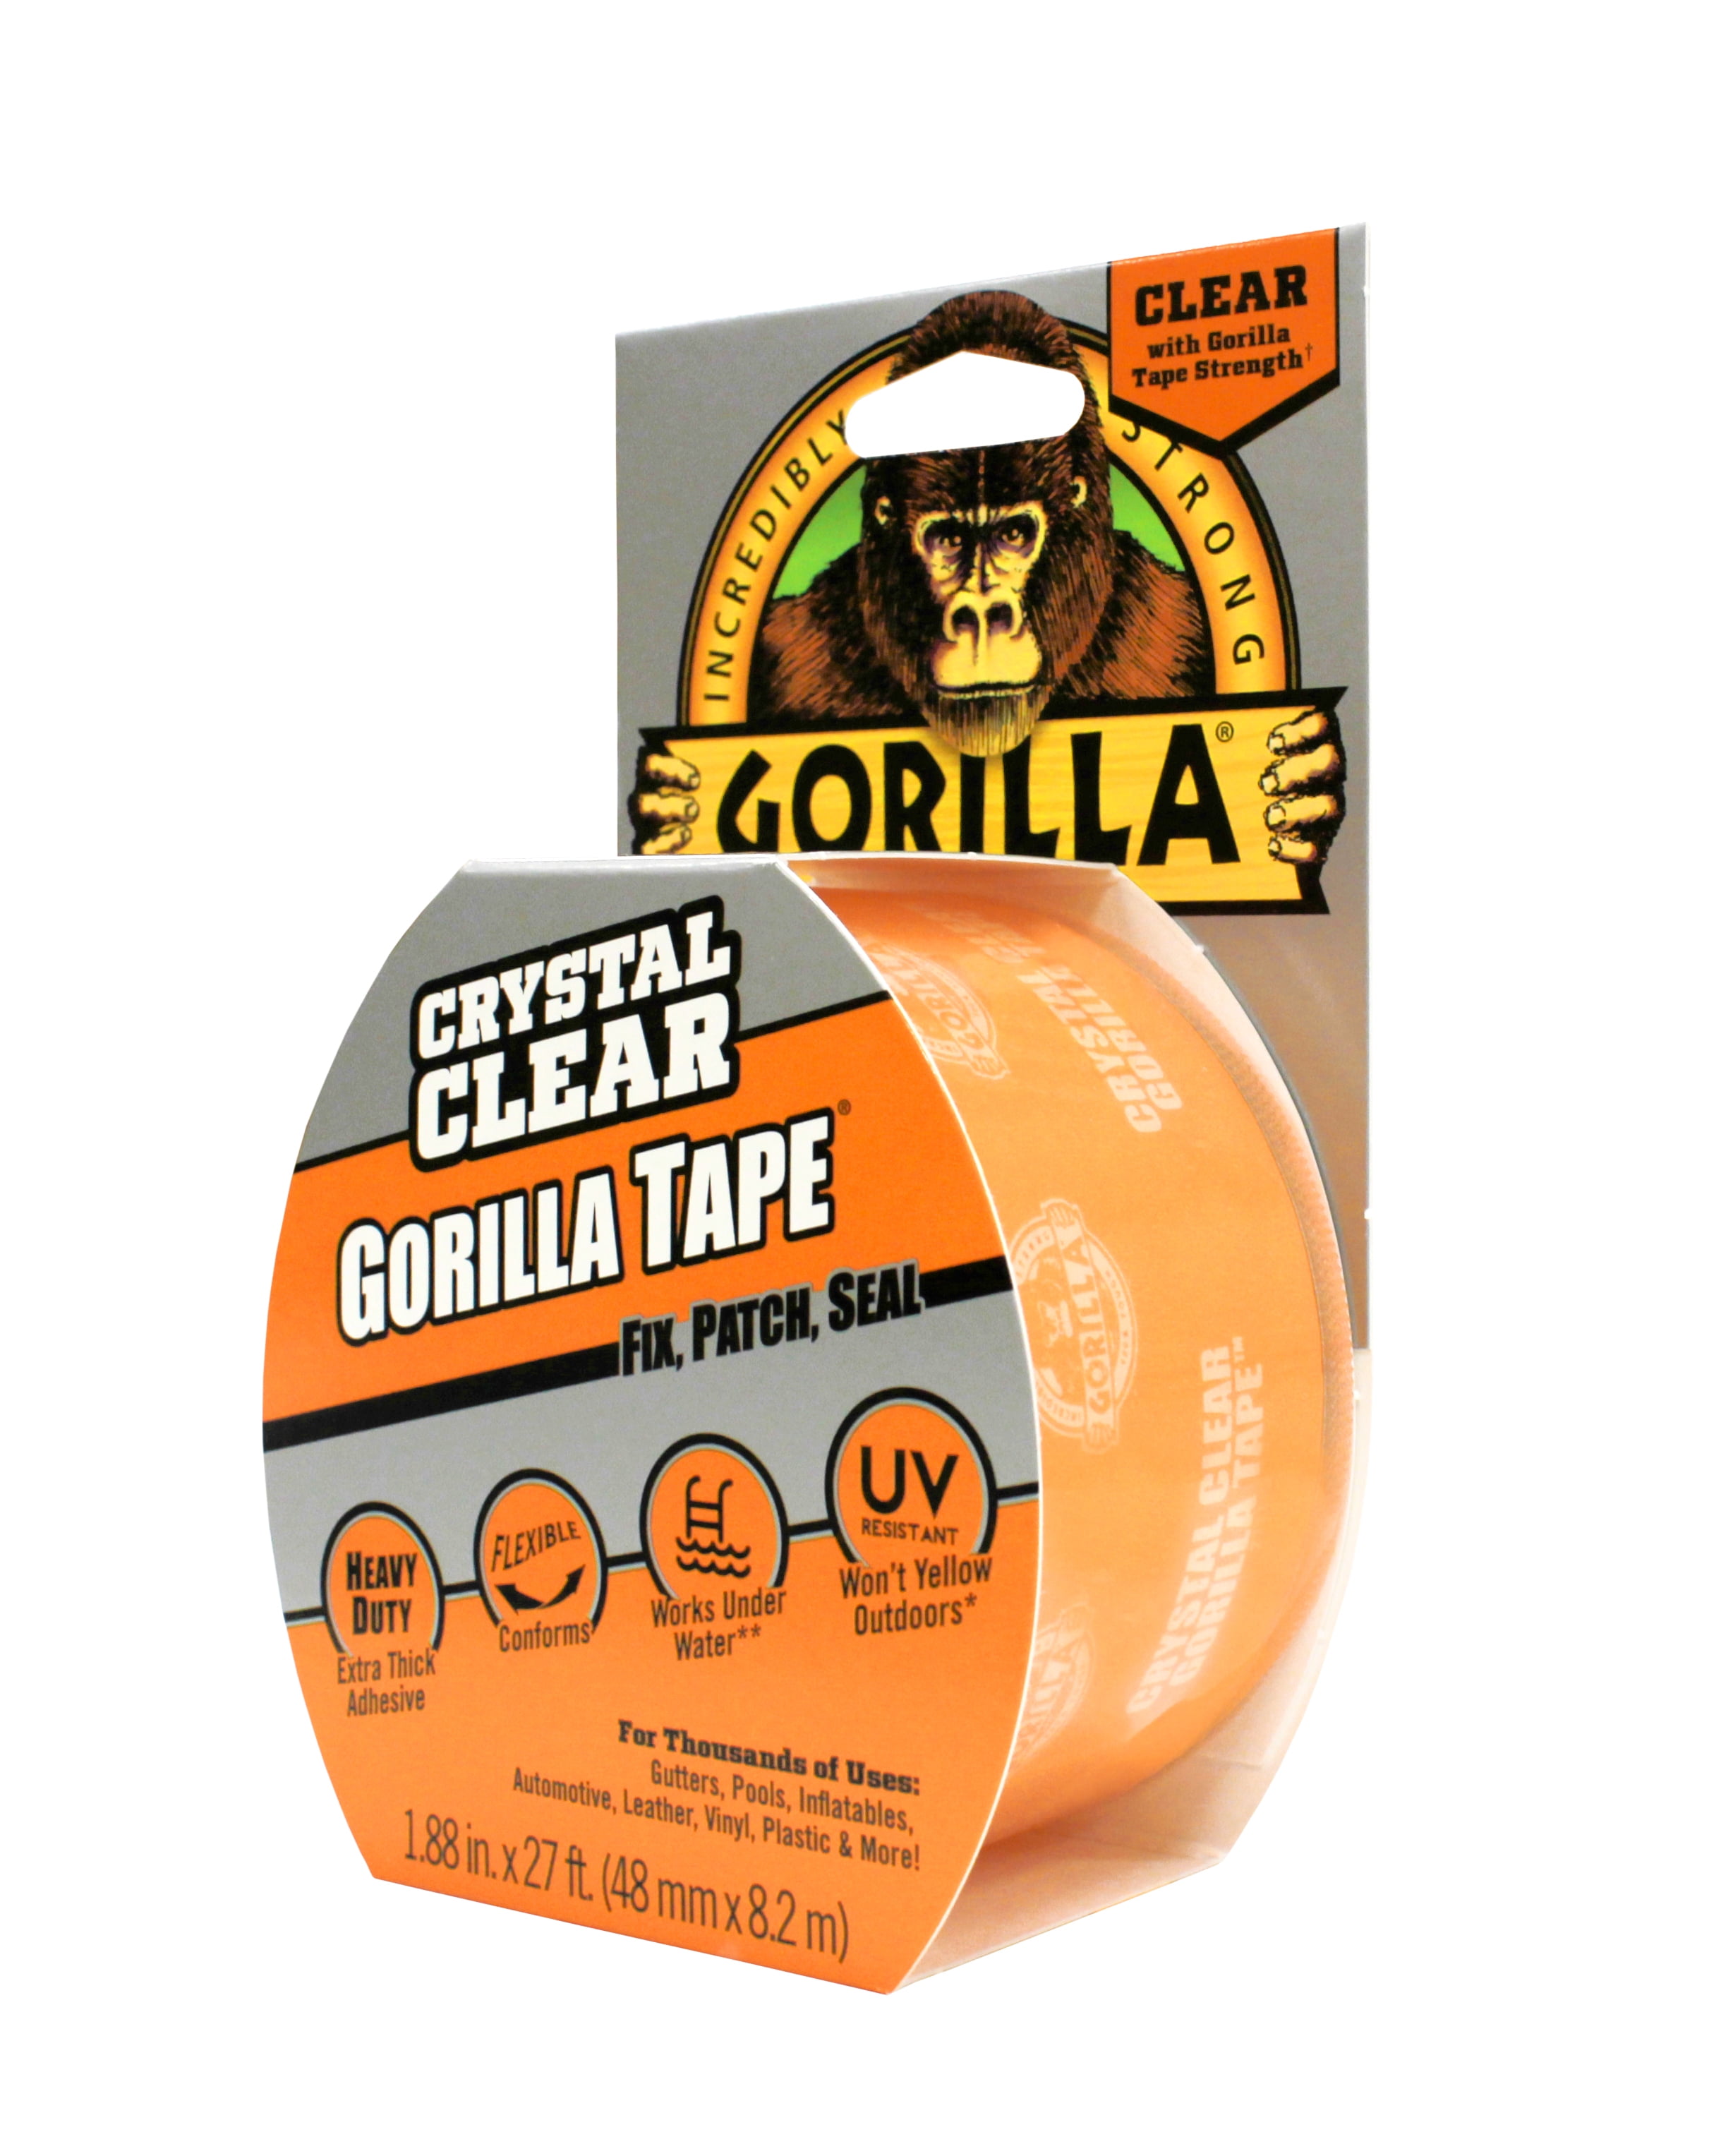 Gorilla 1.88 In. x 18 Yd. Crystal Clear Duct Tape, Clear - Brownsboro  Hardware & Paint